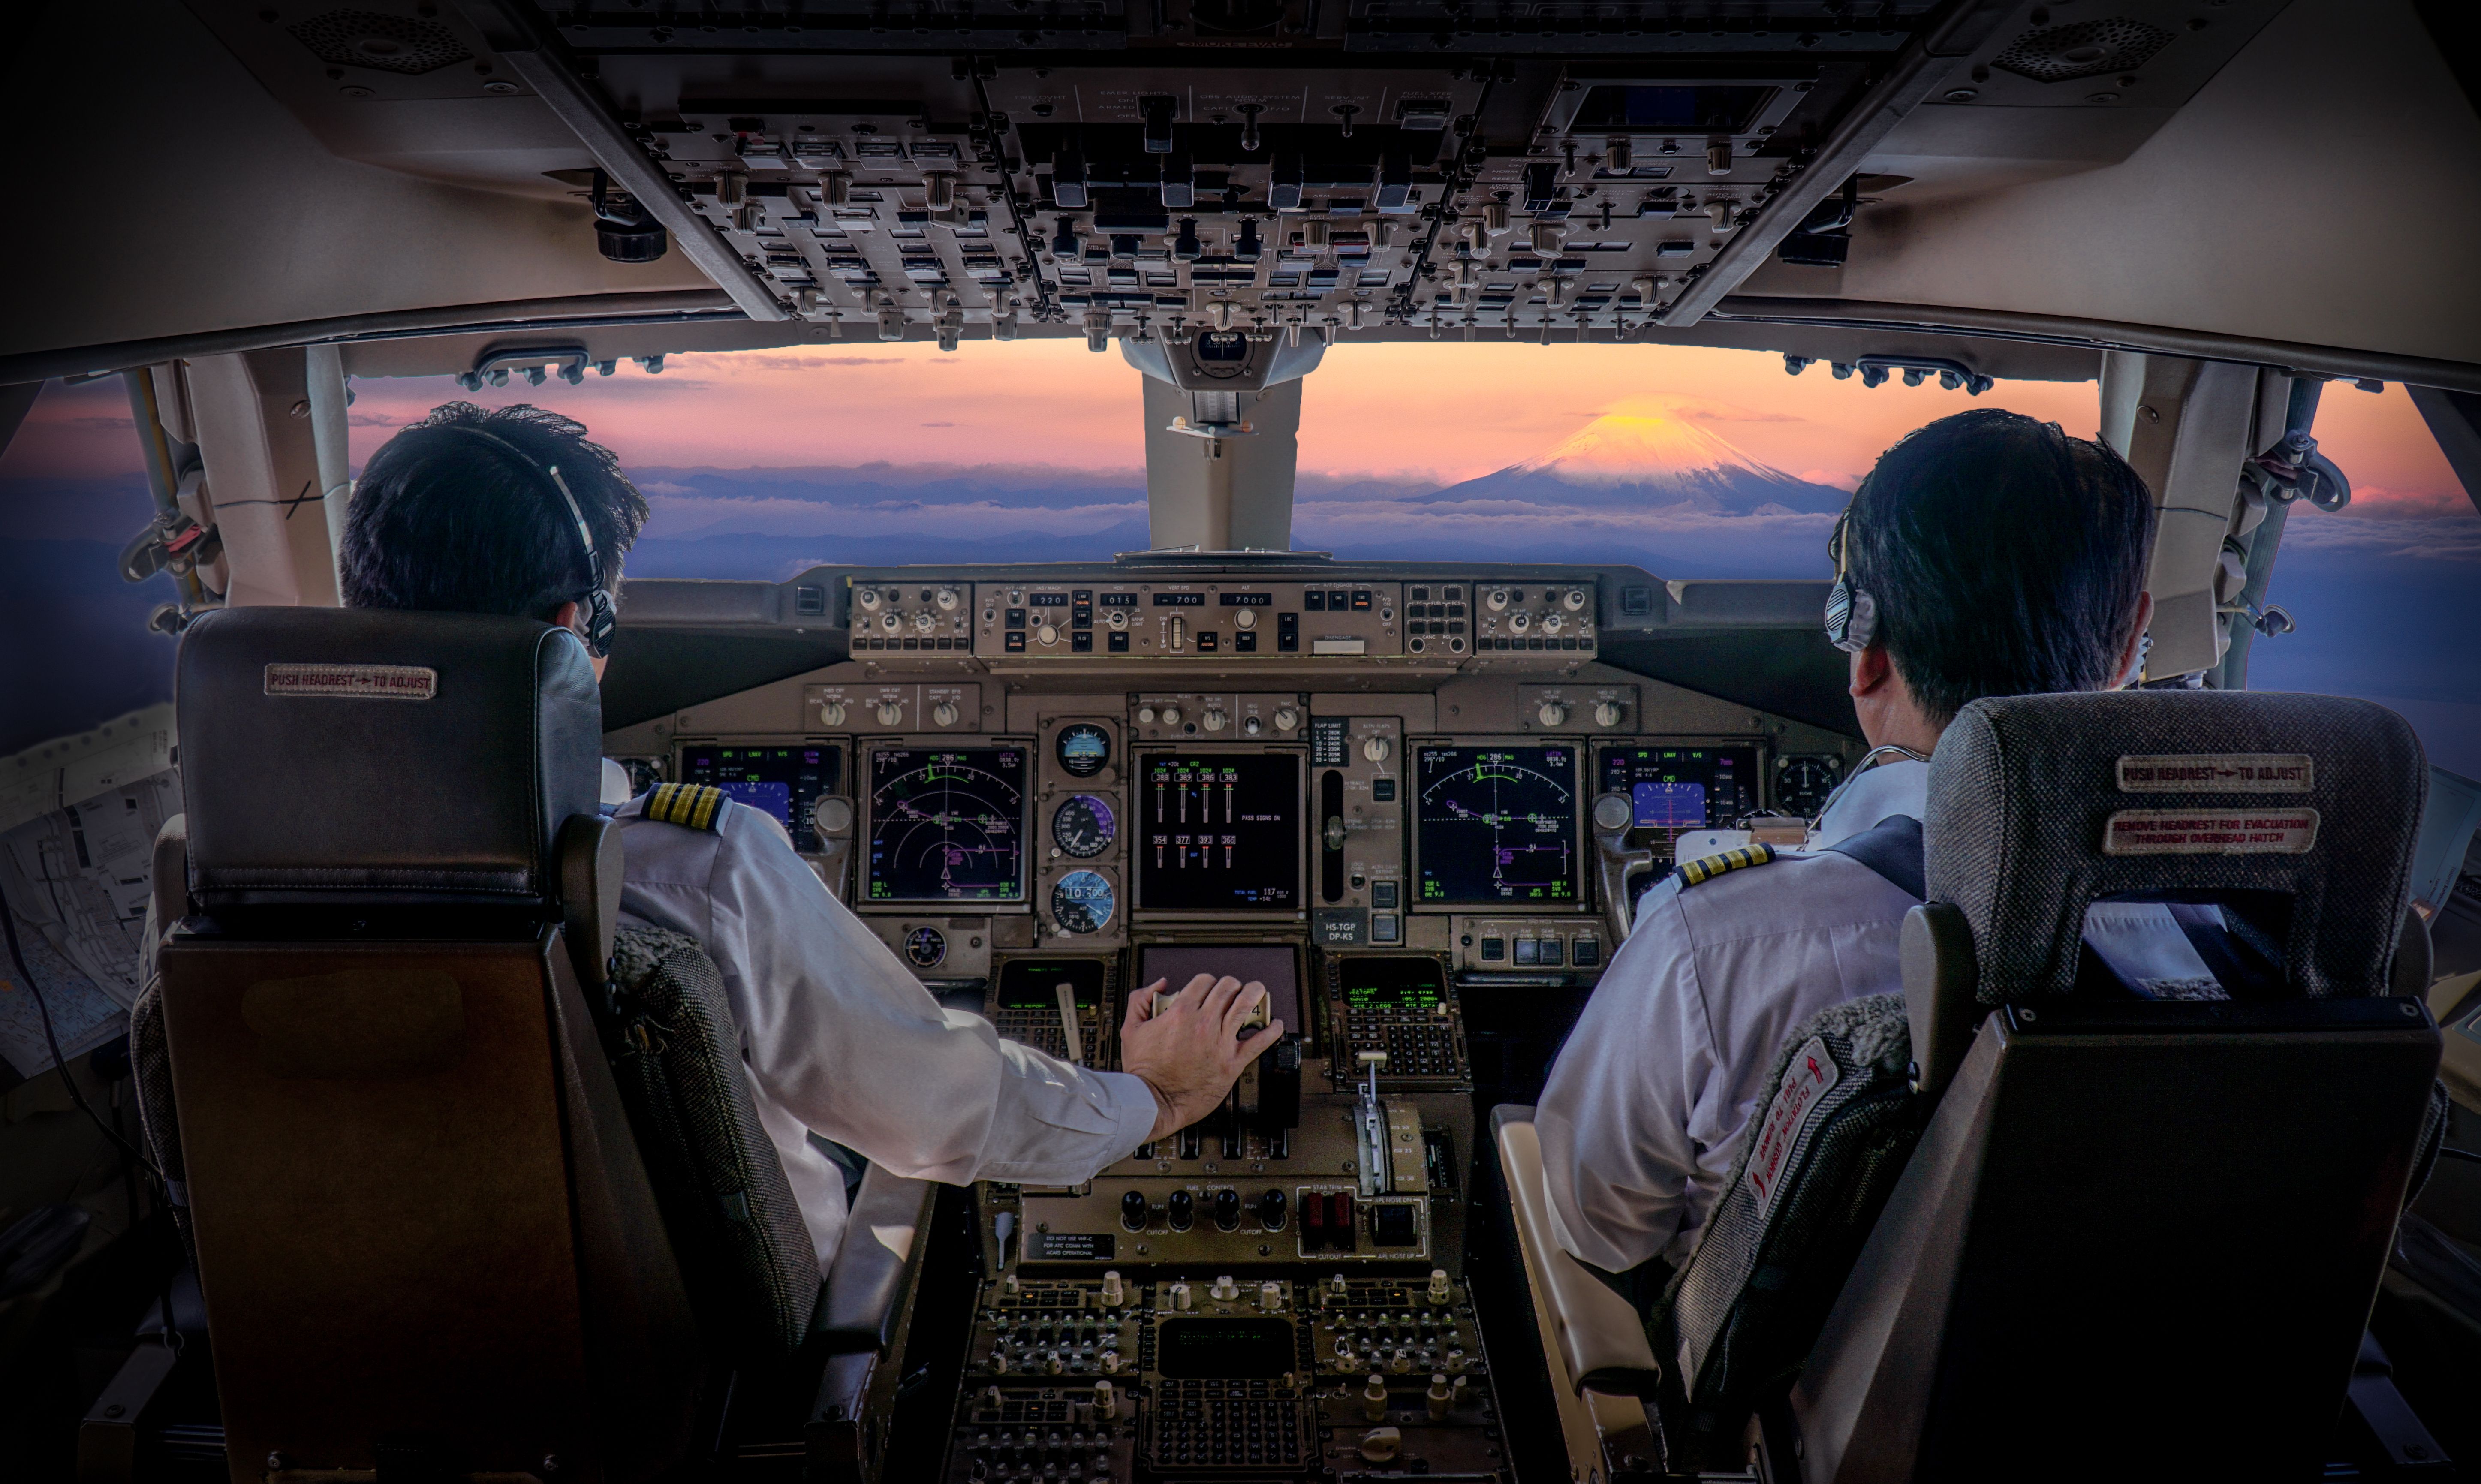 Two pilots work together on the flight deck.